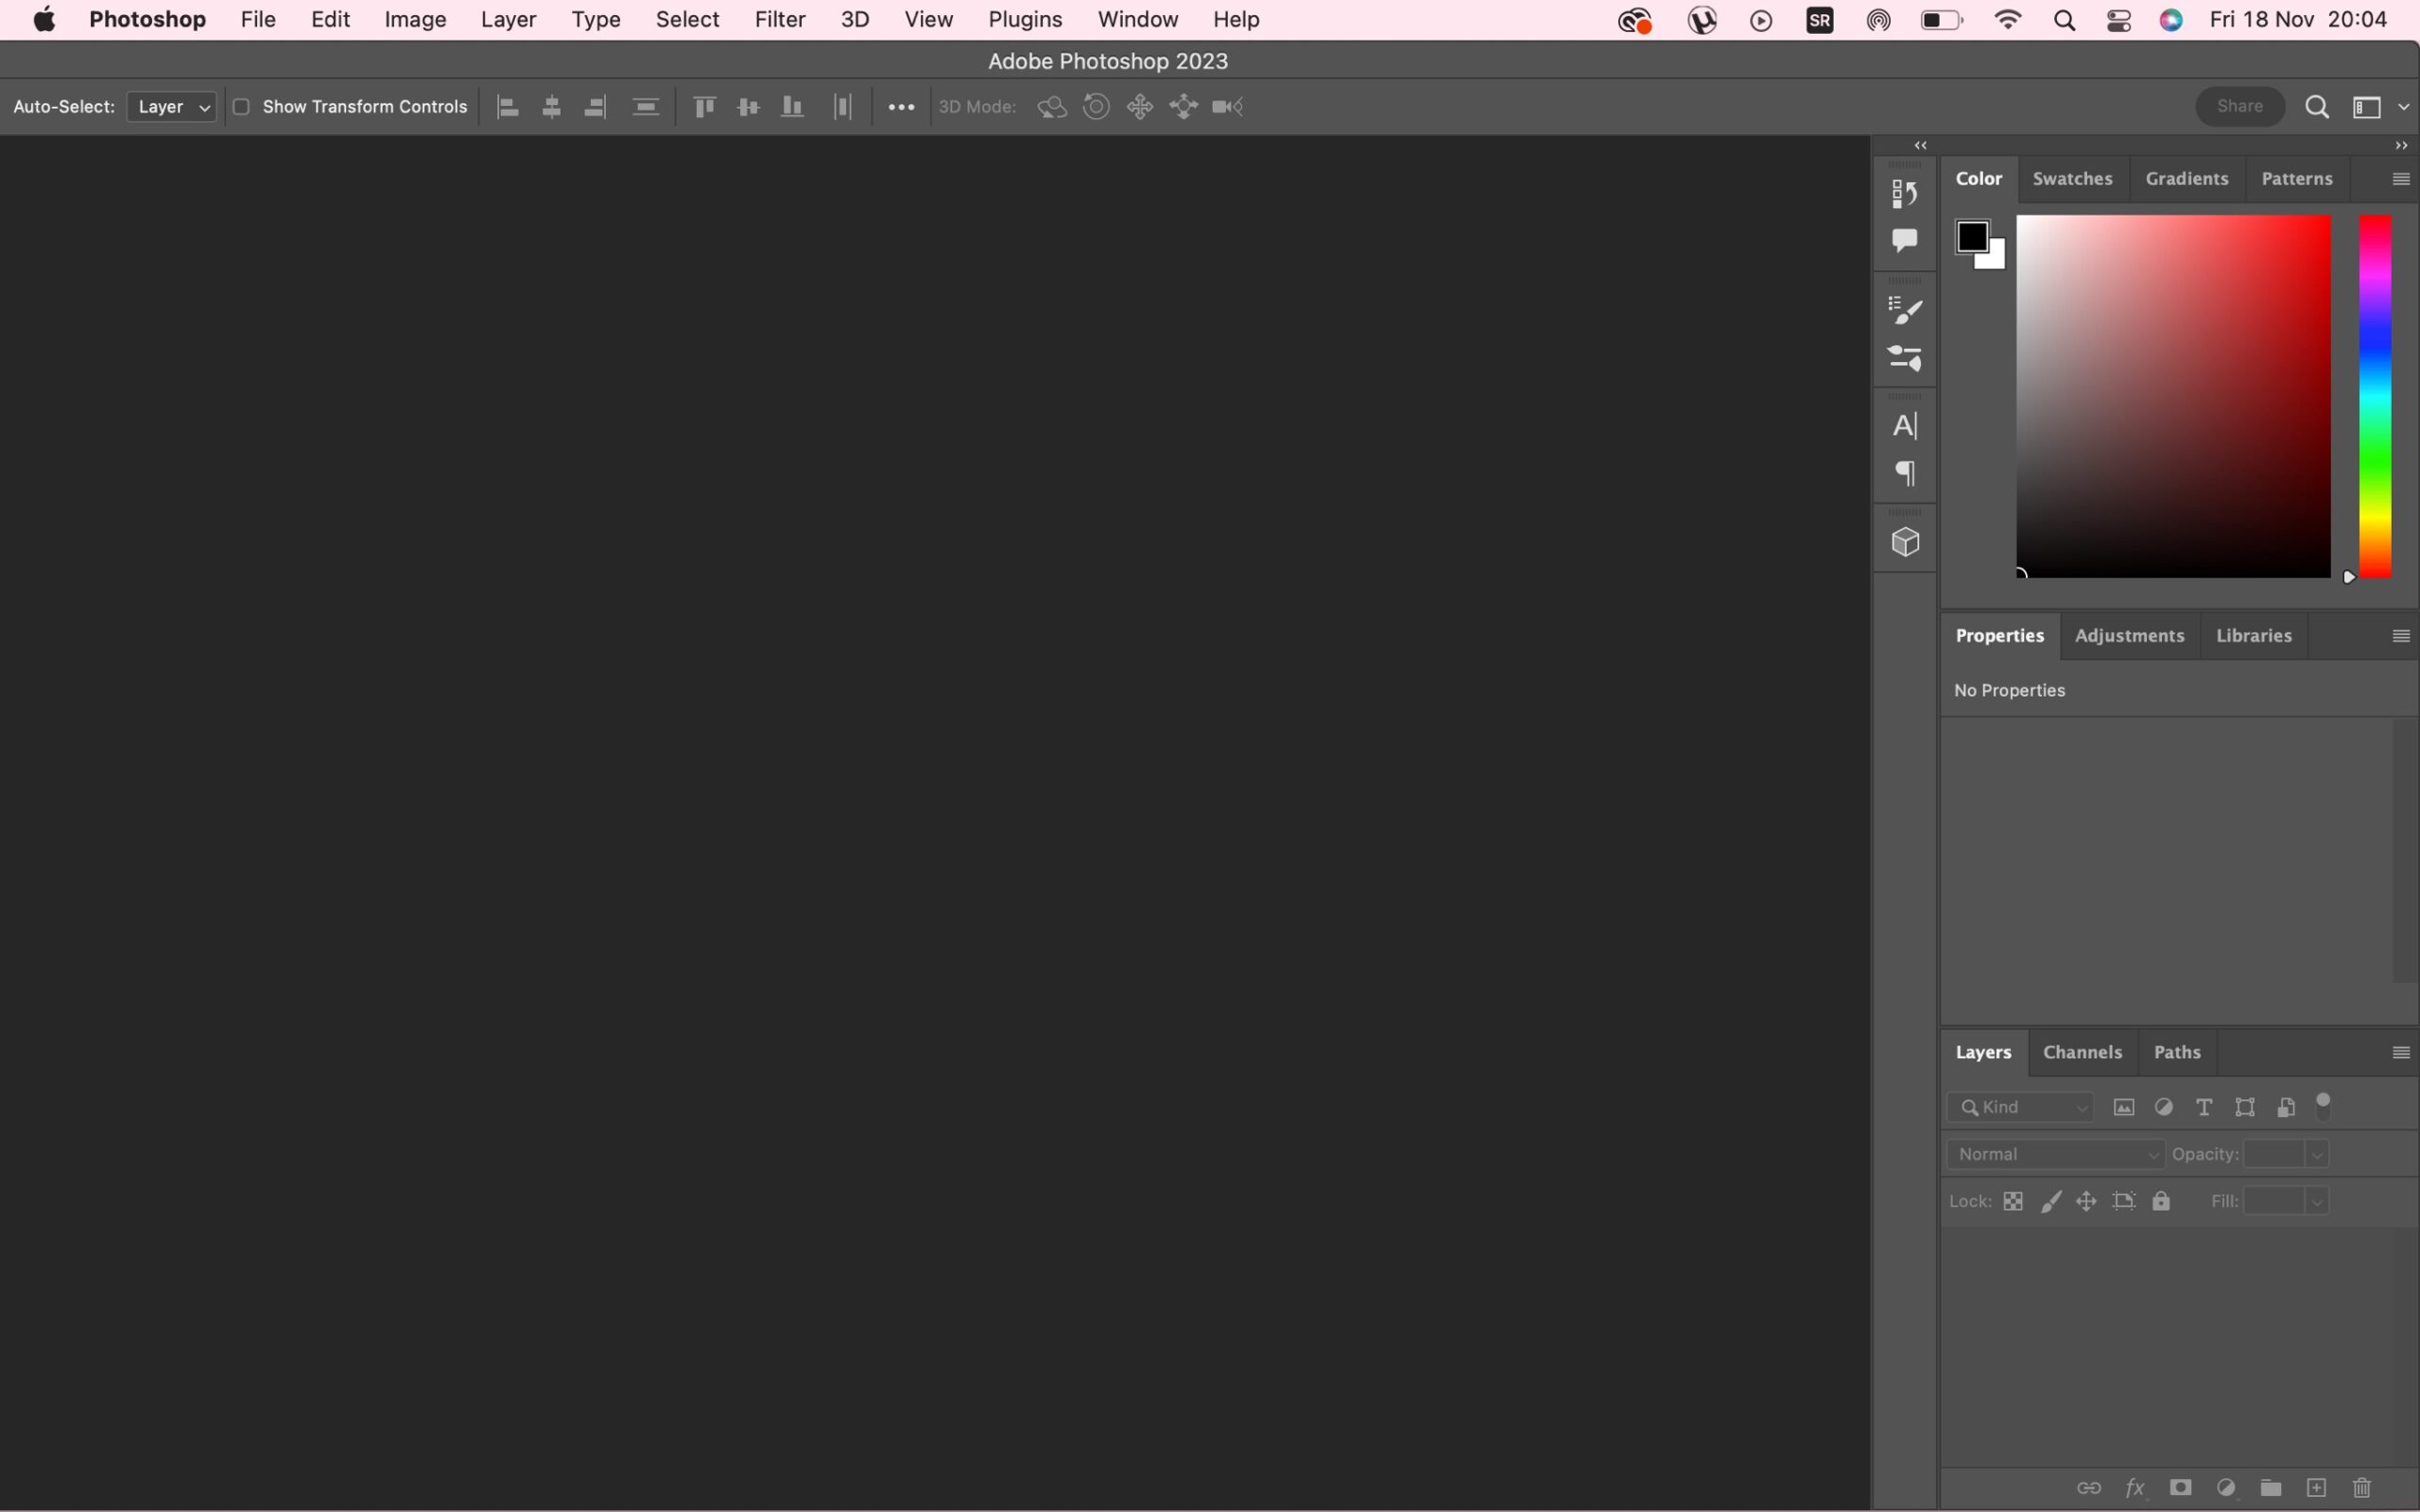 Photoshop UI off screen when app was maximized on larger monitor and monitor is detached